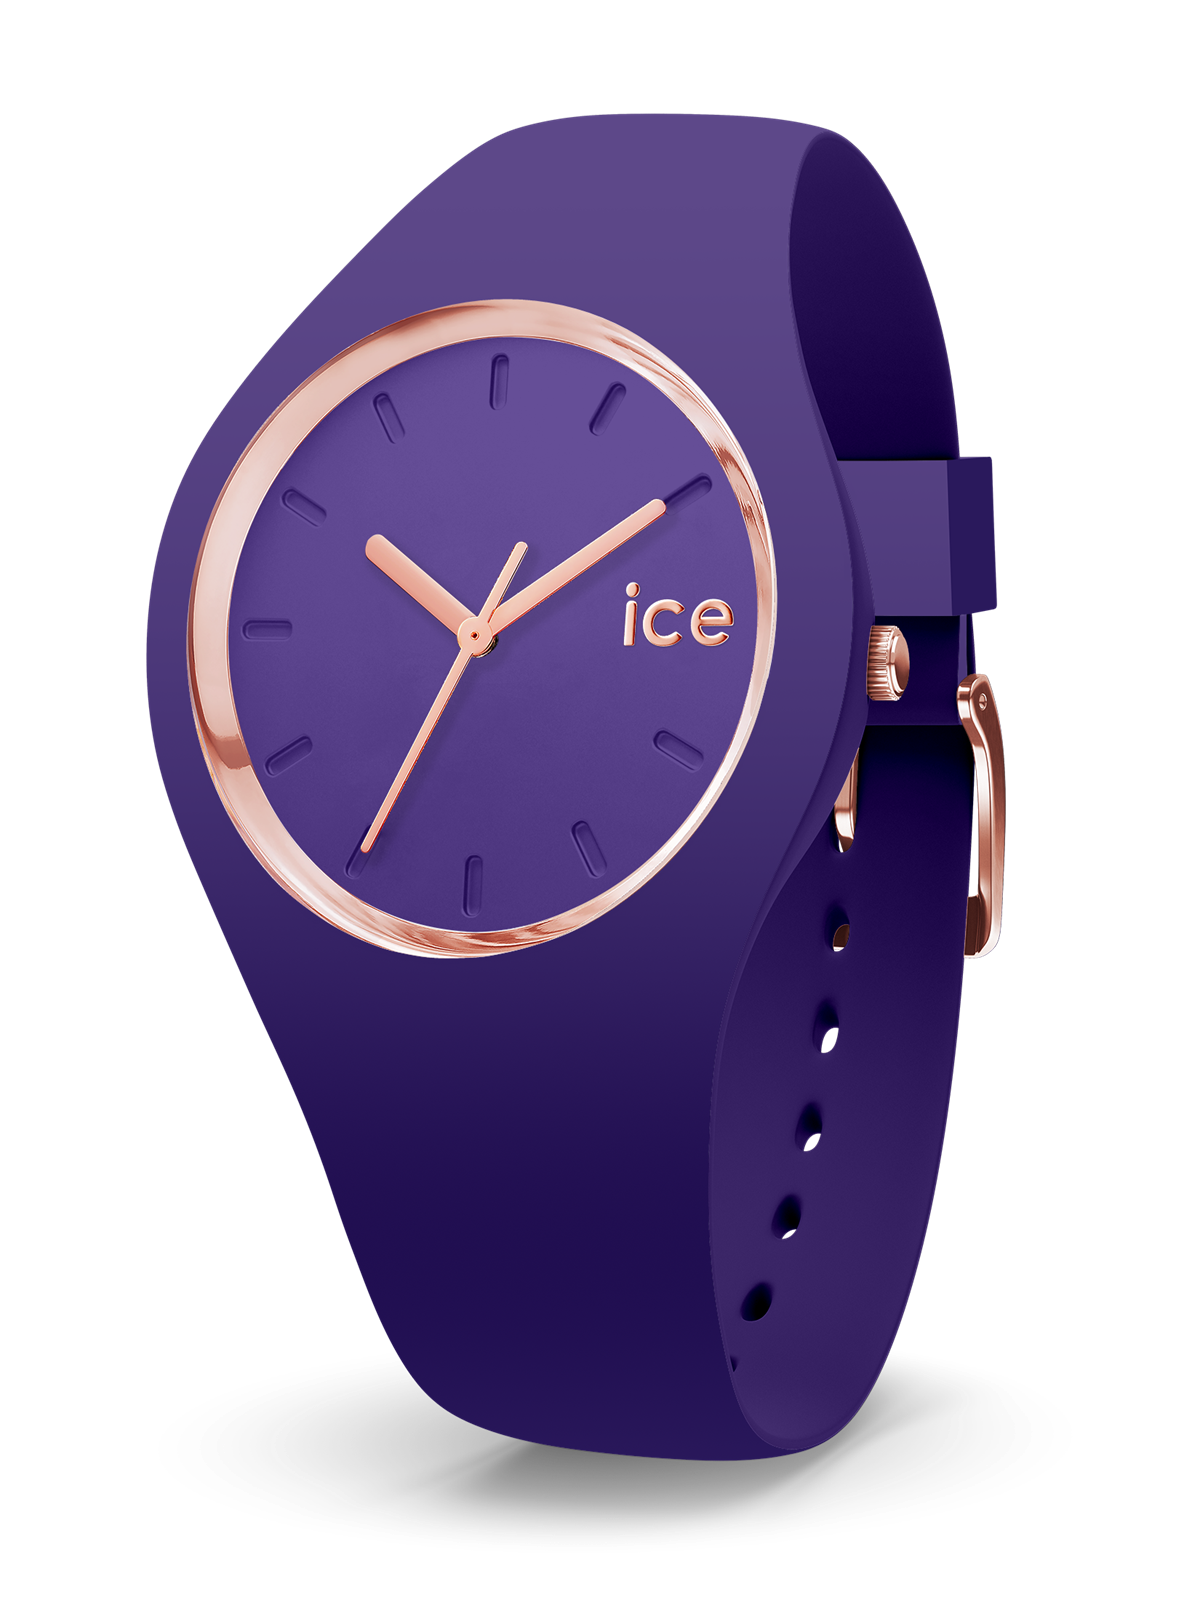 ice-watch_ICE Glam 015696 Ultra Violet_E 89,0